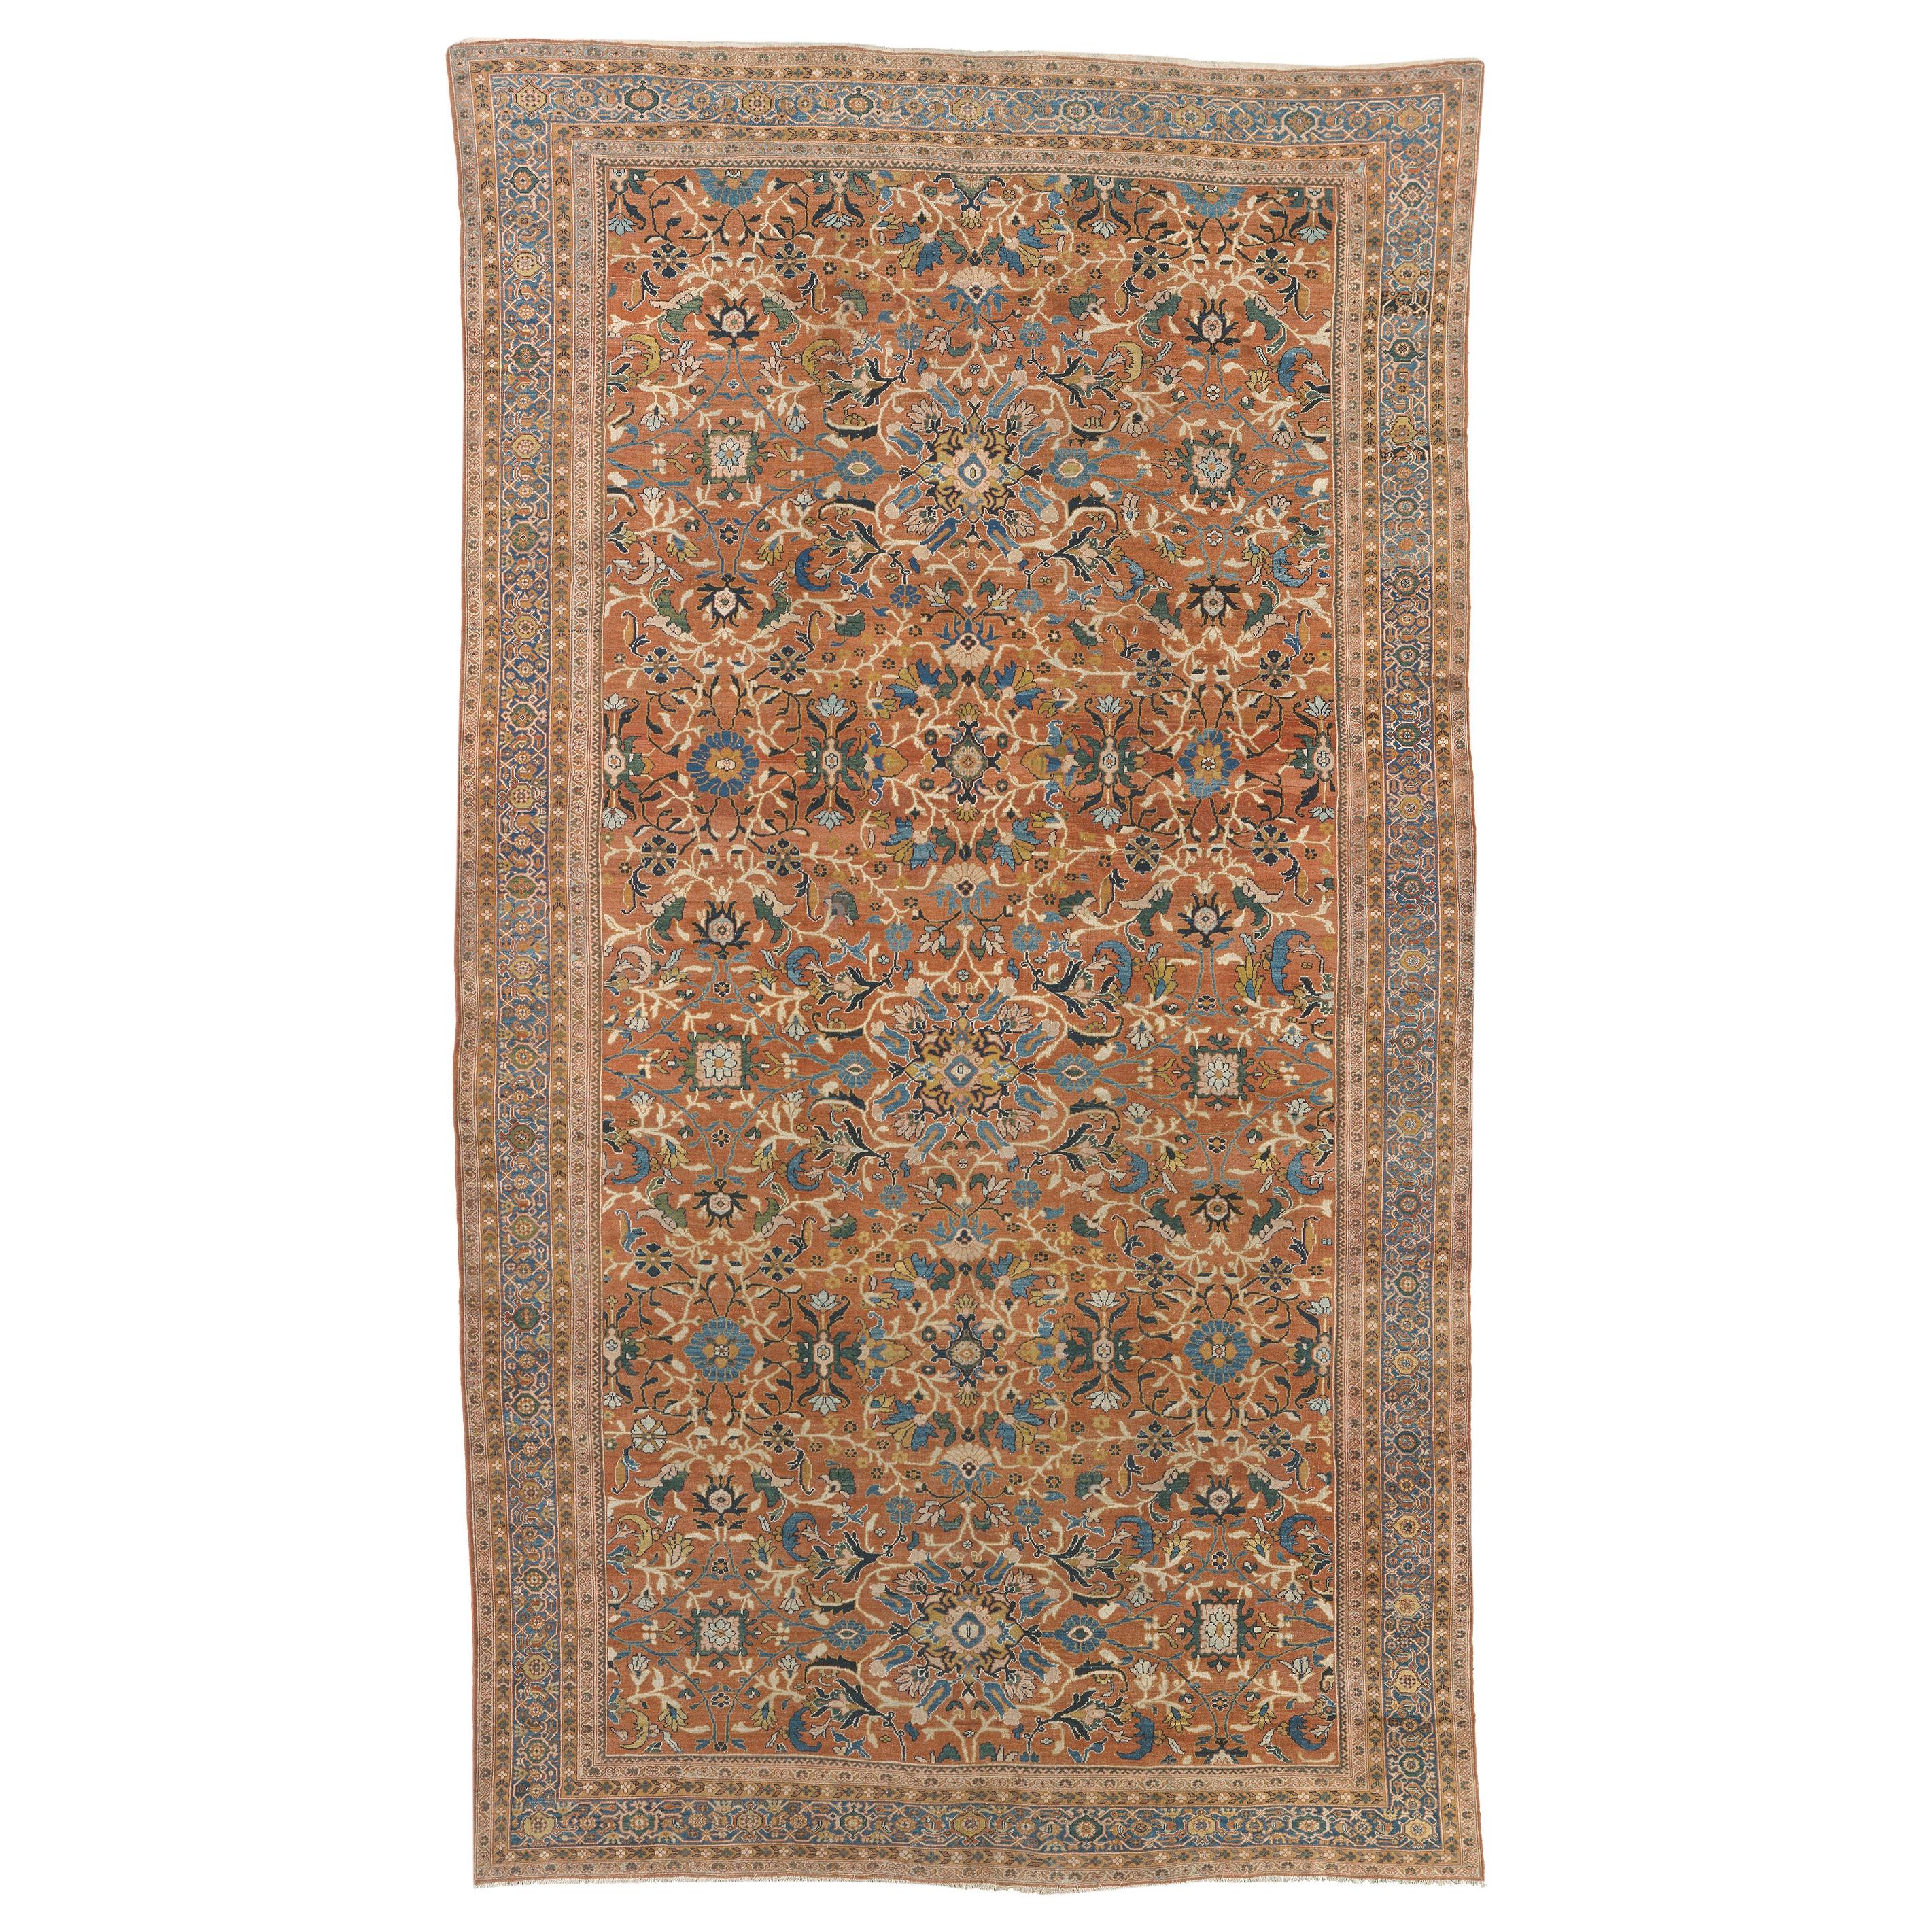 Early 20th Century Persian Ziegler Sultanabad Rug